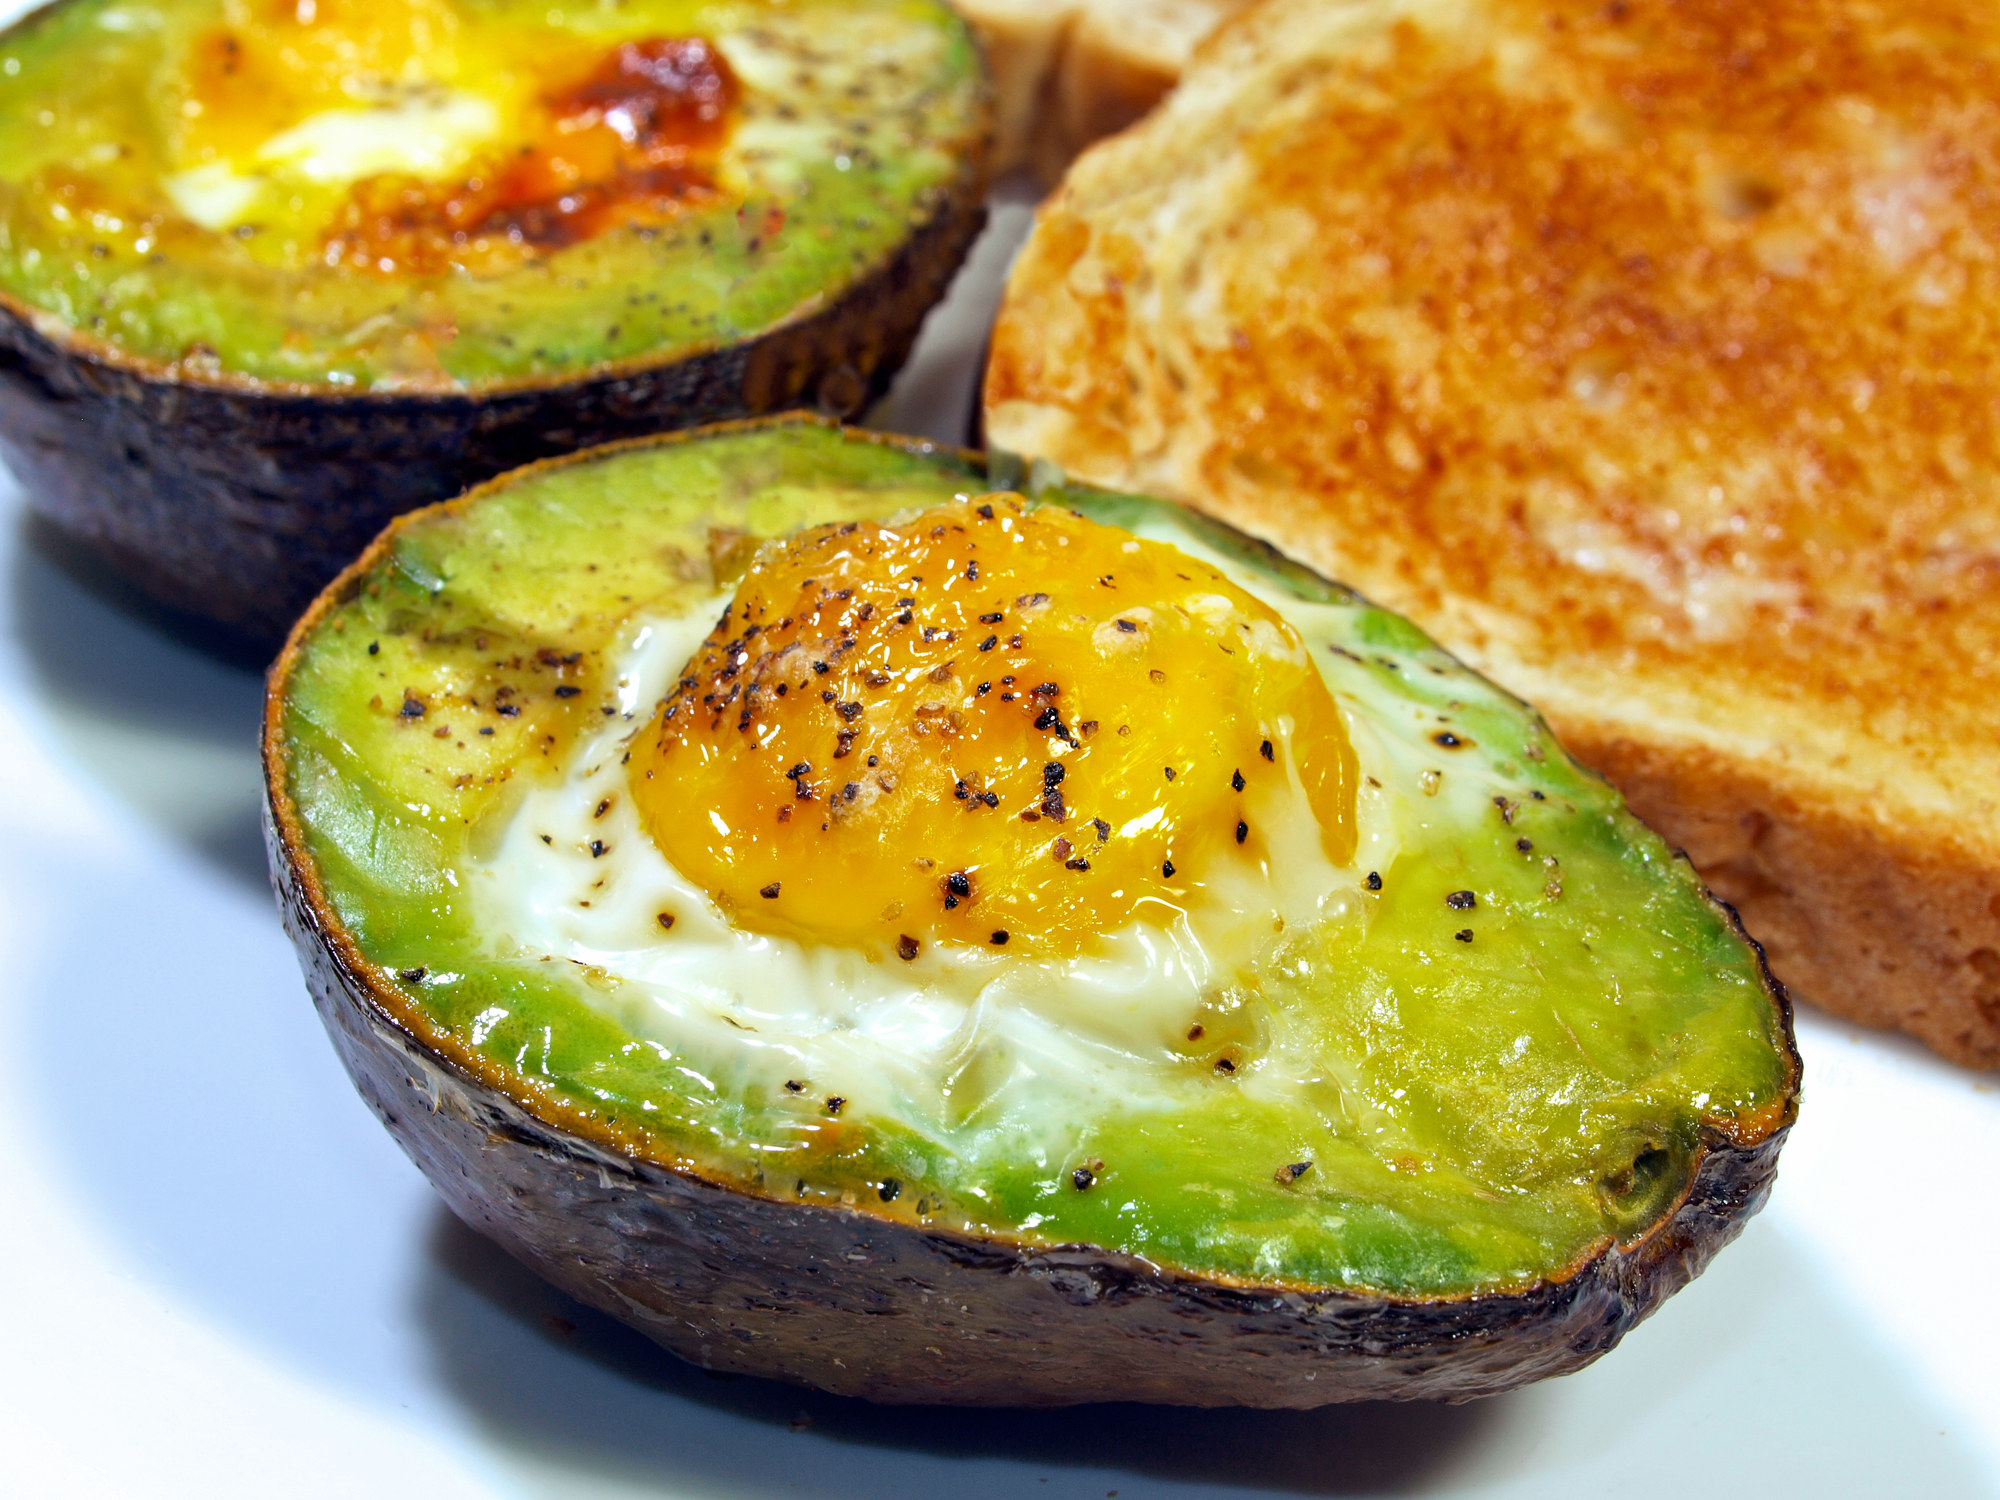 Baked egg and avocado with a side of toast